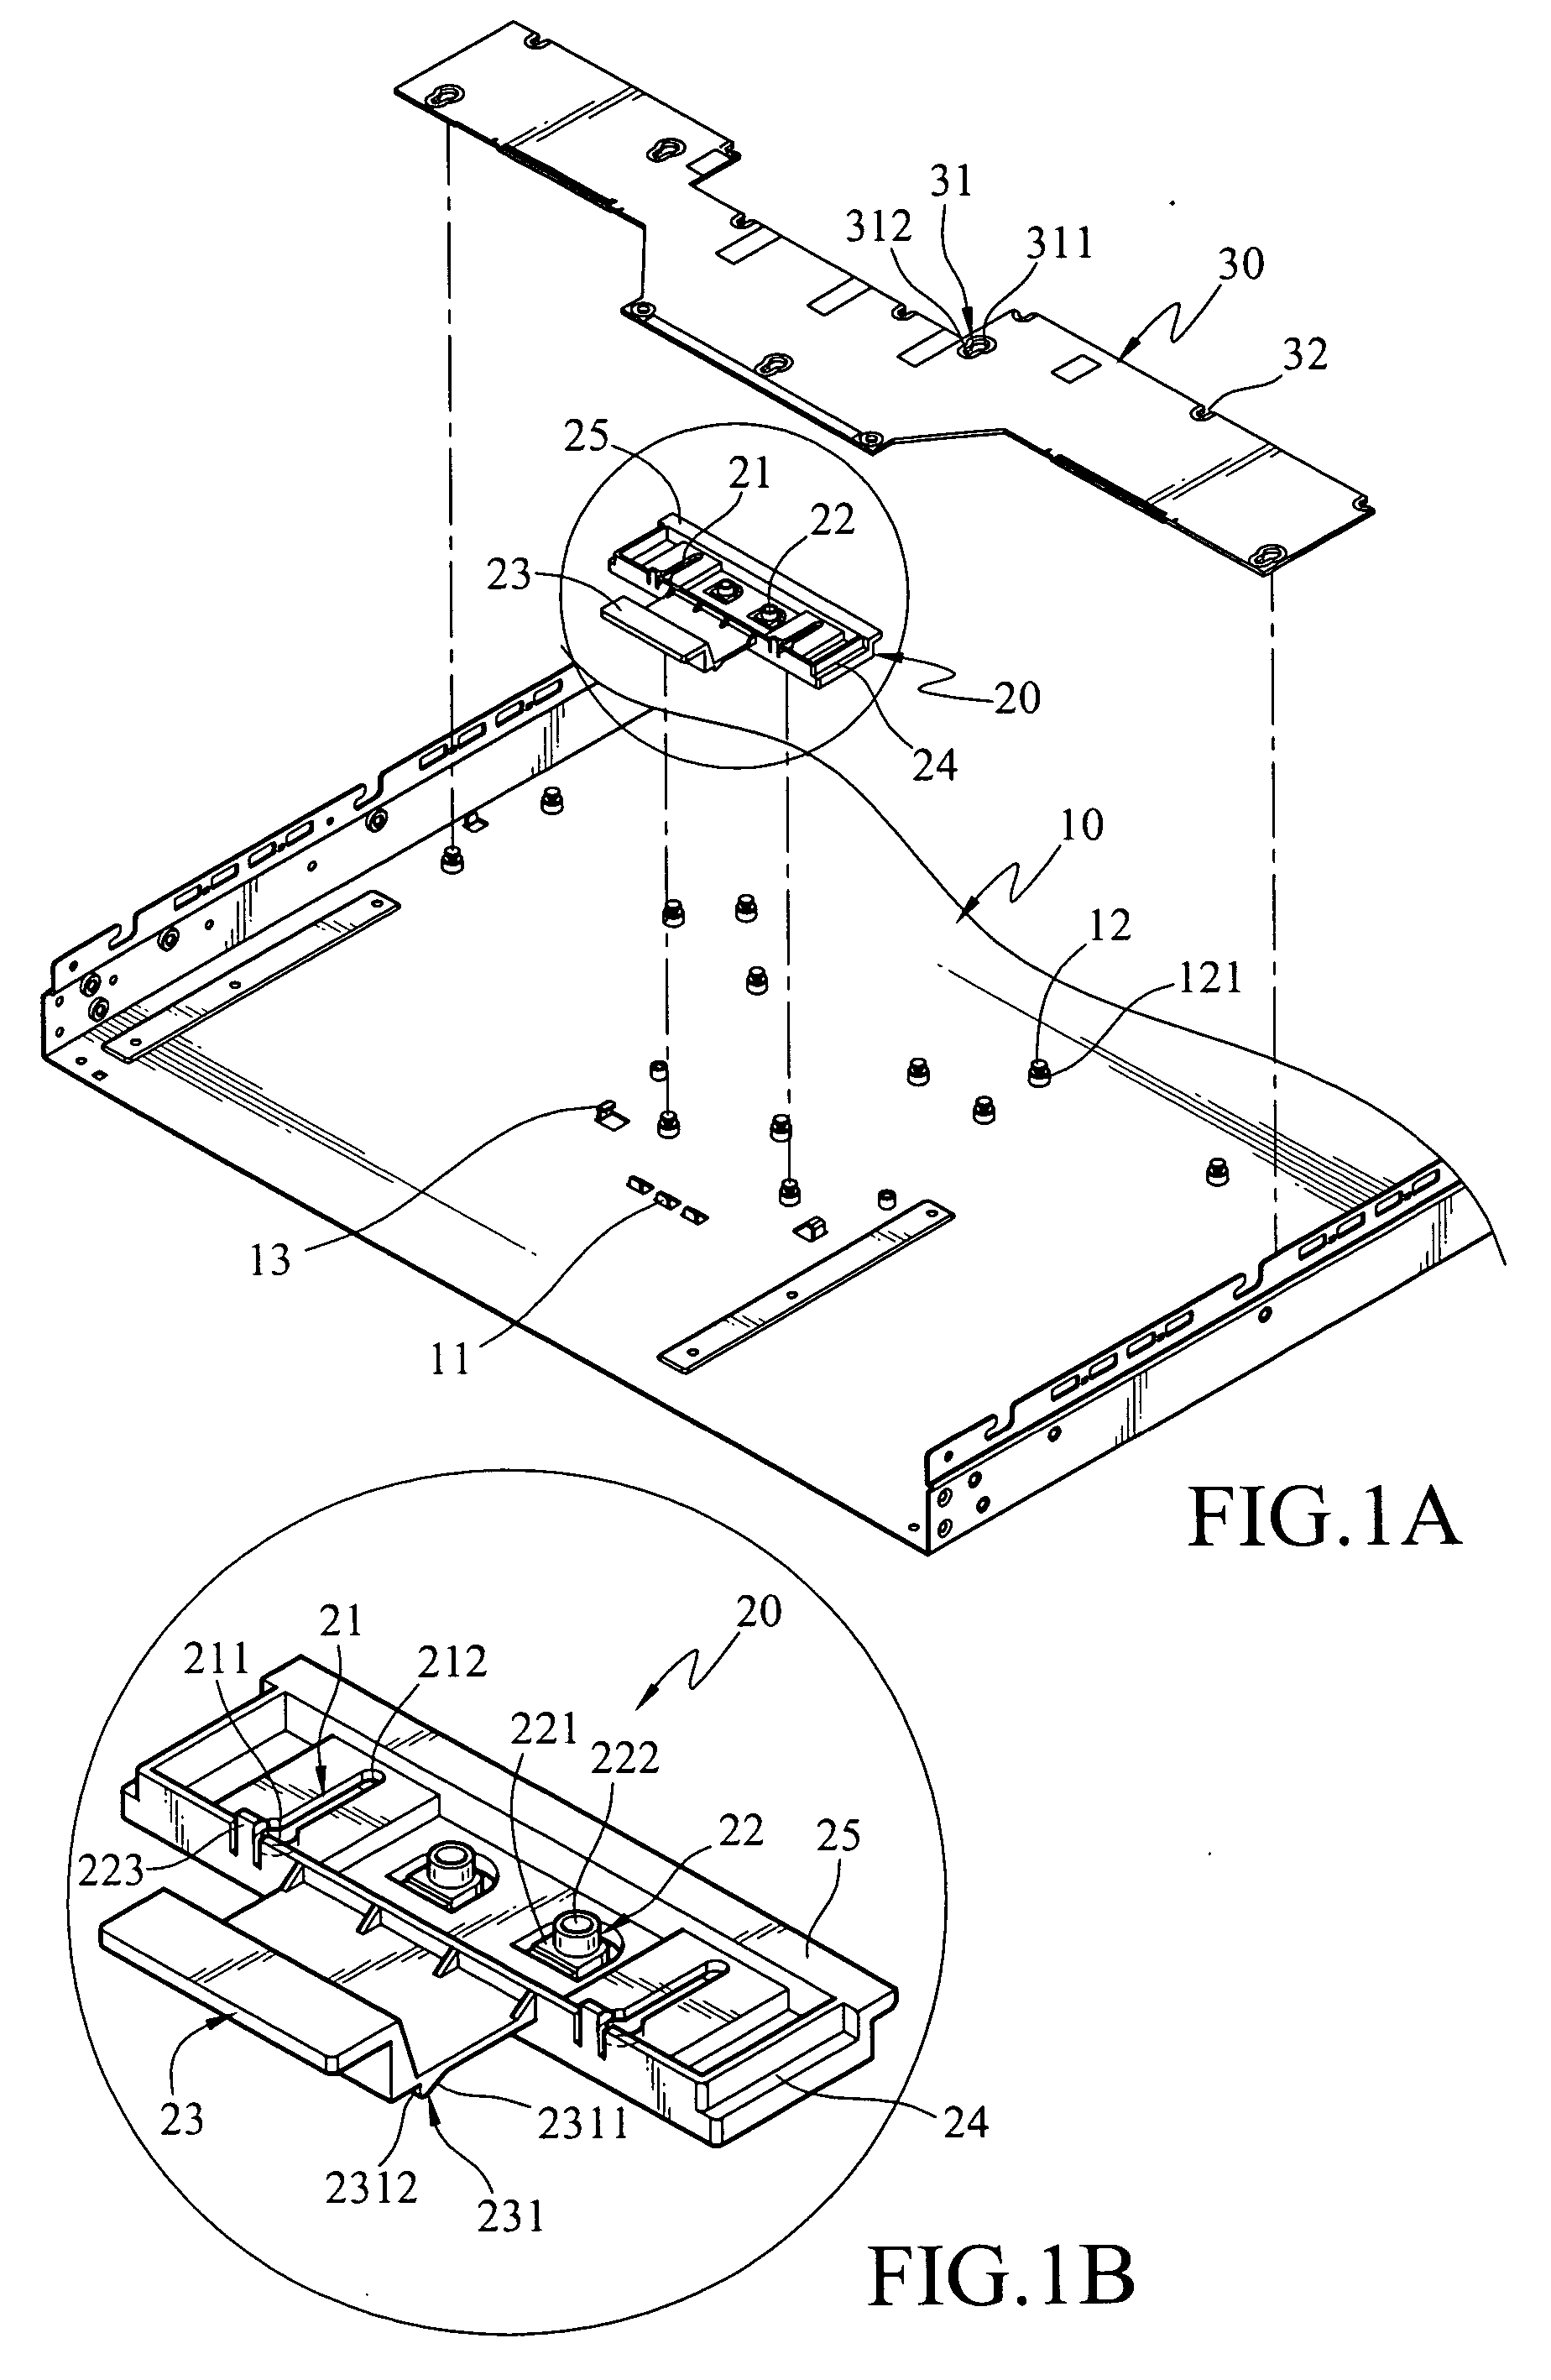 Circuit board fastening structure